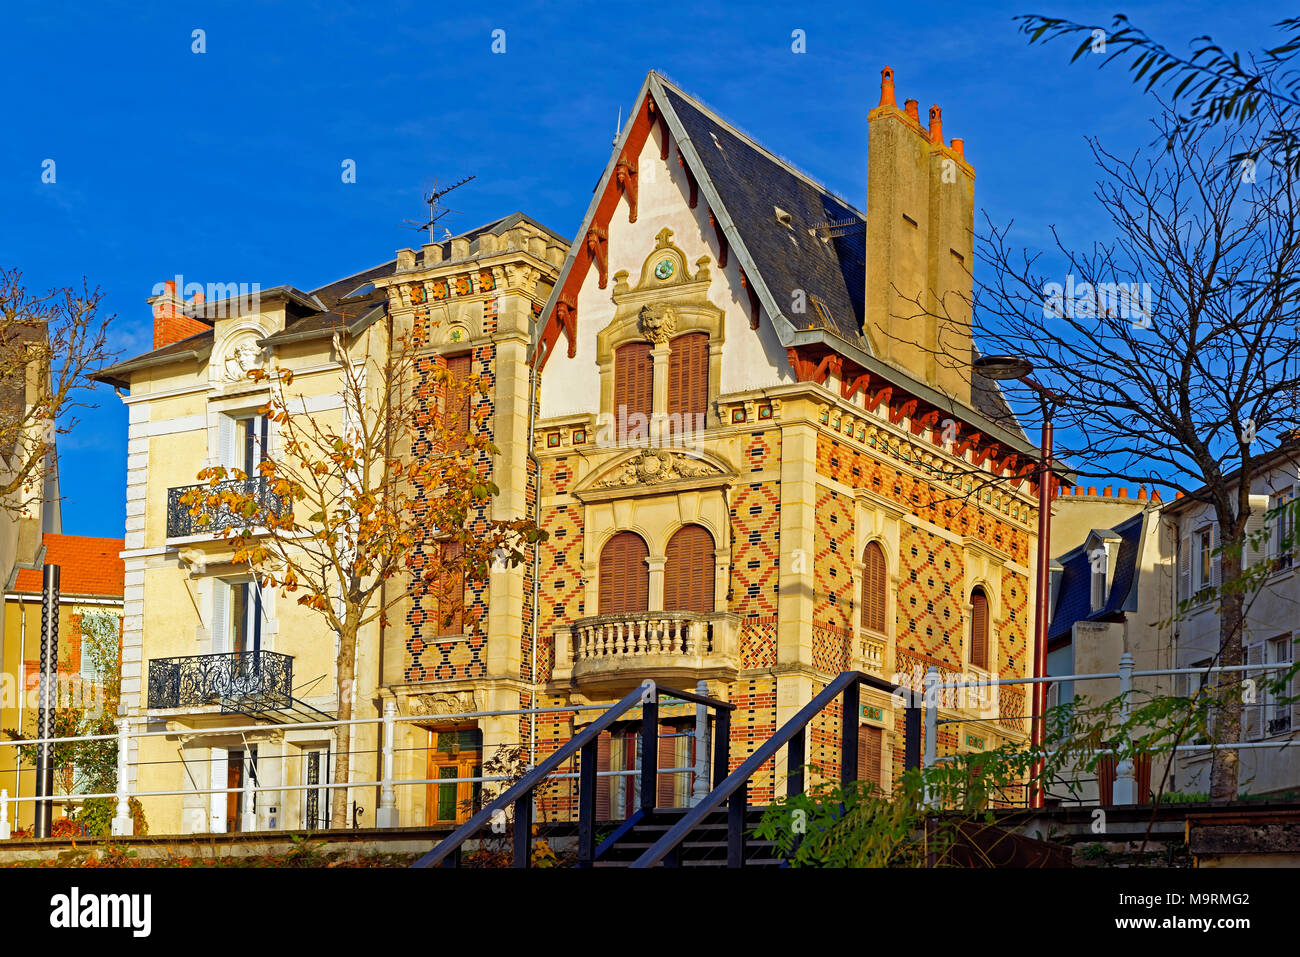 Europe, France, Auvergne, Vichy, Rue Thermale Numéro 7, houses, extremely, architecture, building, trees, place of interest, tourism, street Stock Photo